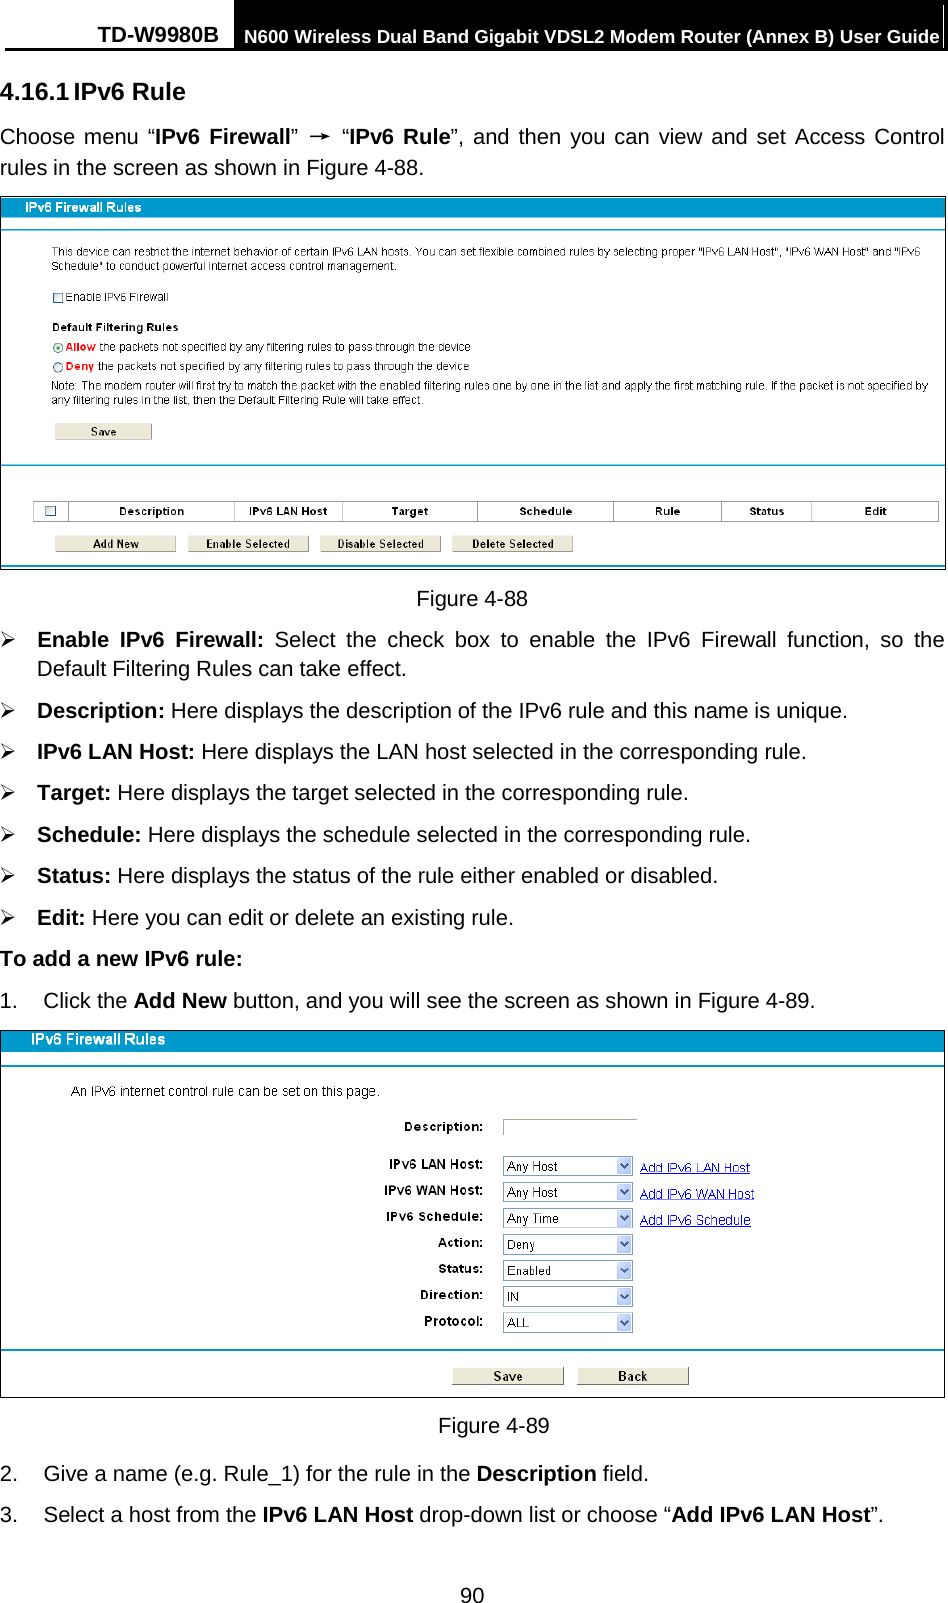 TD-W9980B N600 Wireless Dual Band Gigabit VDSL2 Modem Router (Annex B) User Guide  4.16.1 IPv6 Rule Choose menu “IPv6 Firewall” → “IPv6 Rule”, and then you can view and set Access Control rules in the screen as shown in Figure 4-88.  Figure 4-88  Enable  IPv6  Firewall: Select the check box to enable the IPv6  Firewall function, so the Default Filtering Rules can take effect.    Description: Here displays the description of the IPv6 rule and this name is unique.    IPv6 LAN Host: Here displays the LAN host selected in the corresponding rule.    Target: Here displays the target selected in the corresponding rule.    Schedule: Here displays the schedule selected in the corresponding rule.    Status: Here displays the status of the rule either enabled or disabled.    Edit: Here you can edit or delete an existing rule.   To add a new IPv6 rule: 1.  Click the Add New button, and you will see the screen as shown in Figure 4-89.  Figure 4-89 2. Give a name (e.g. Rule_1) for the rule in the Description field. 3. Select a host from the IPv6 LAN Host drop-down list or choose “Add IPv6 LAN Host”. 90 